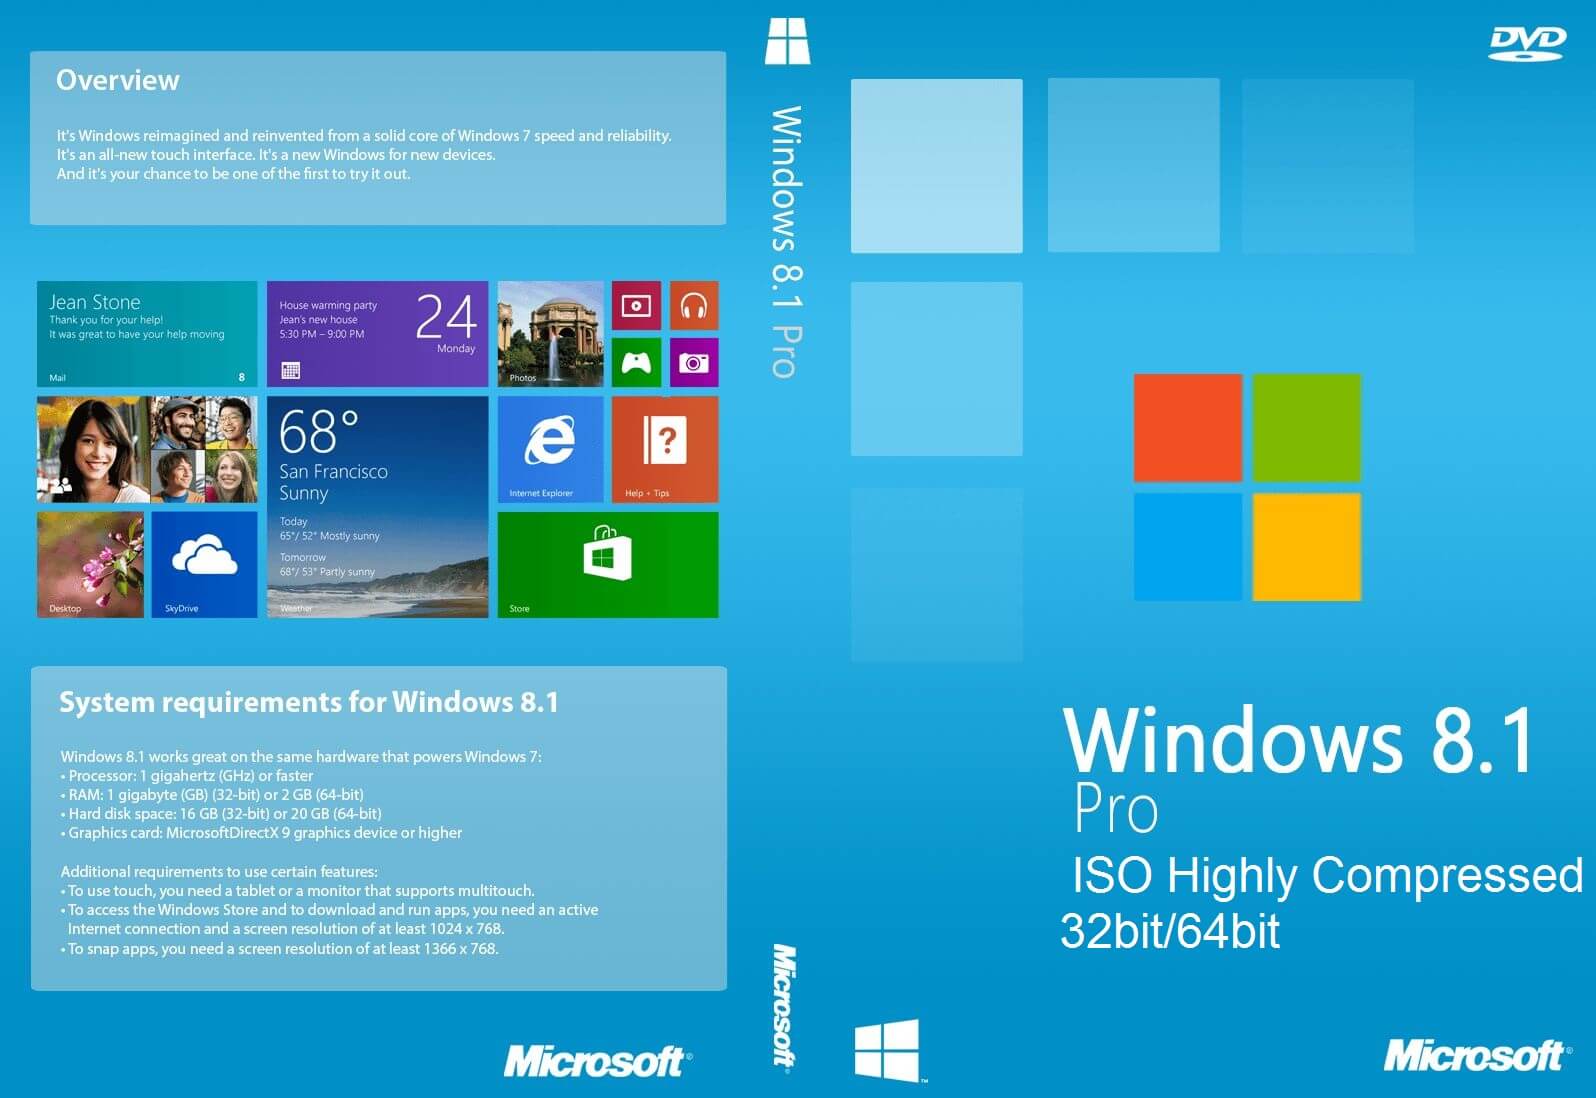 Windows 8.1 Pro ISO Highly Compressed Free Download